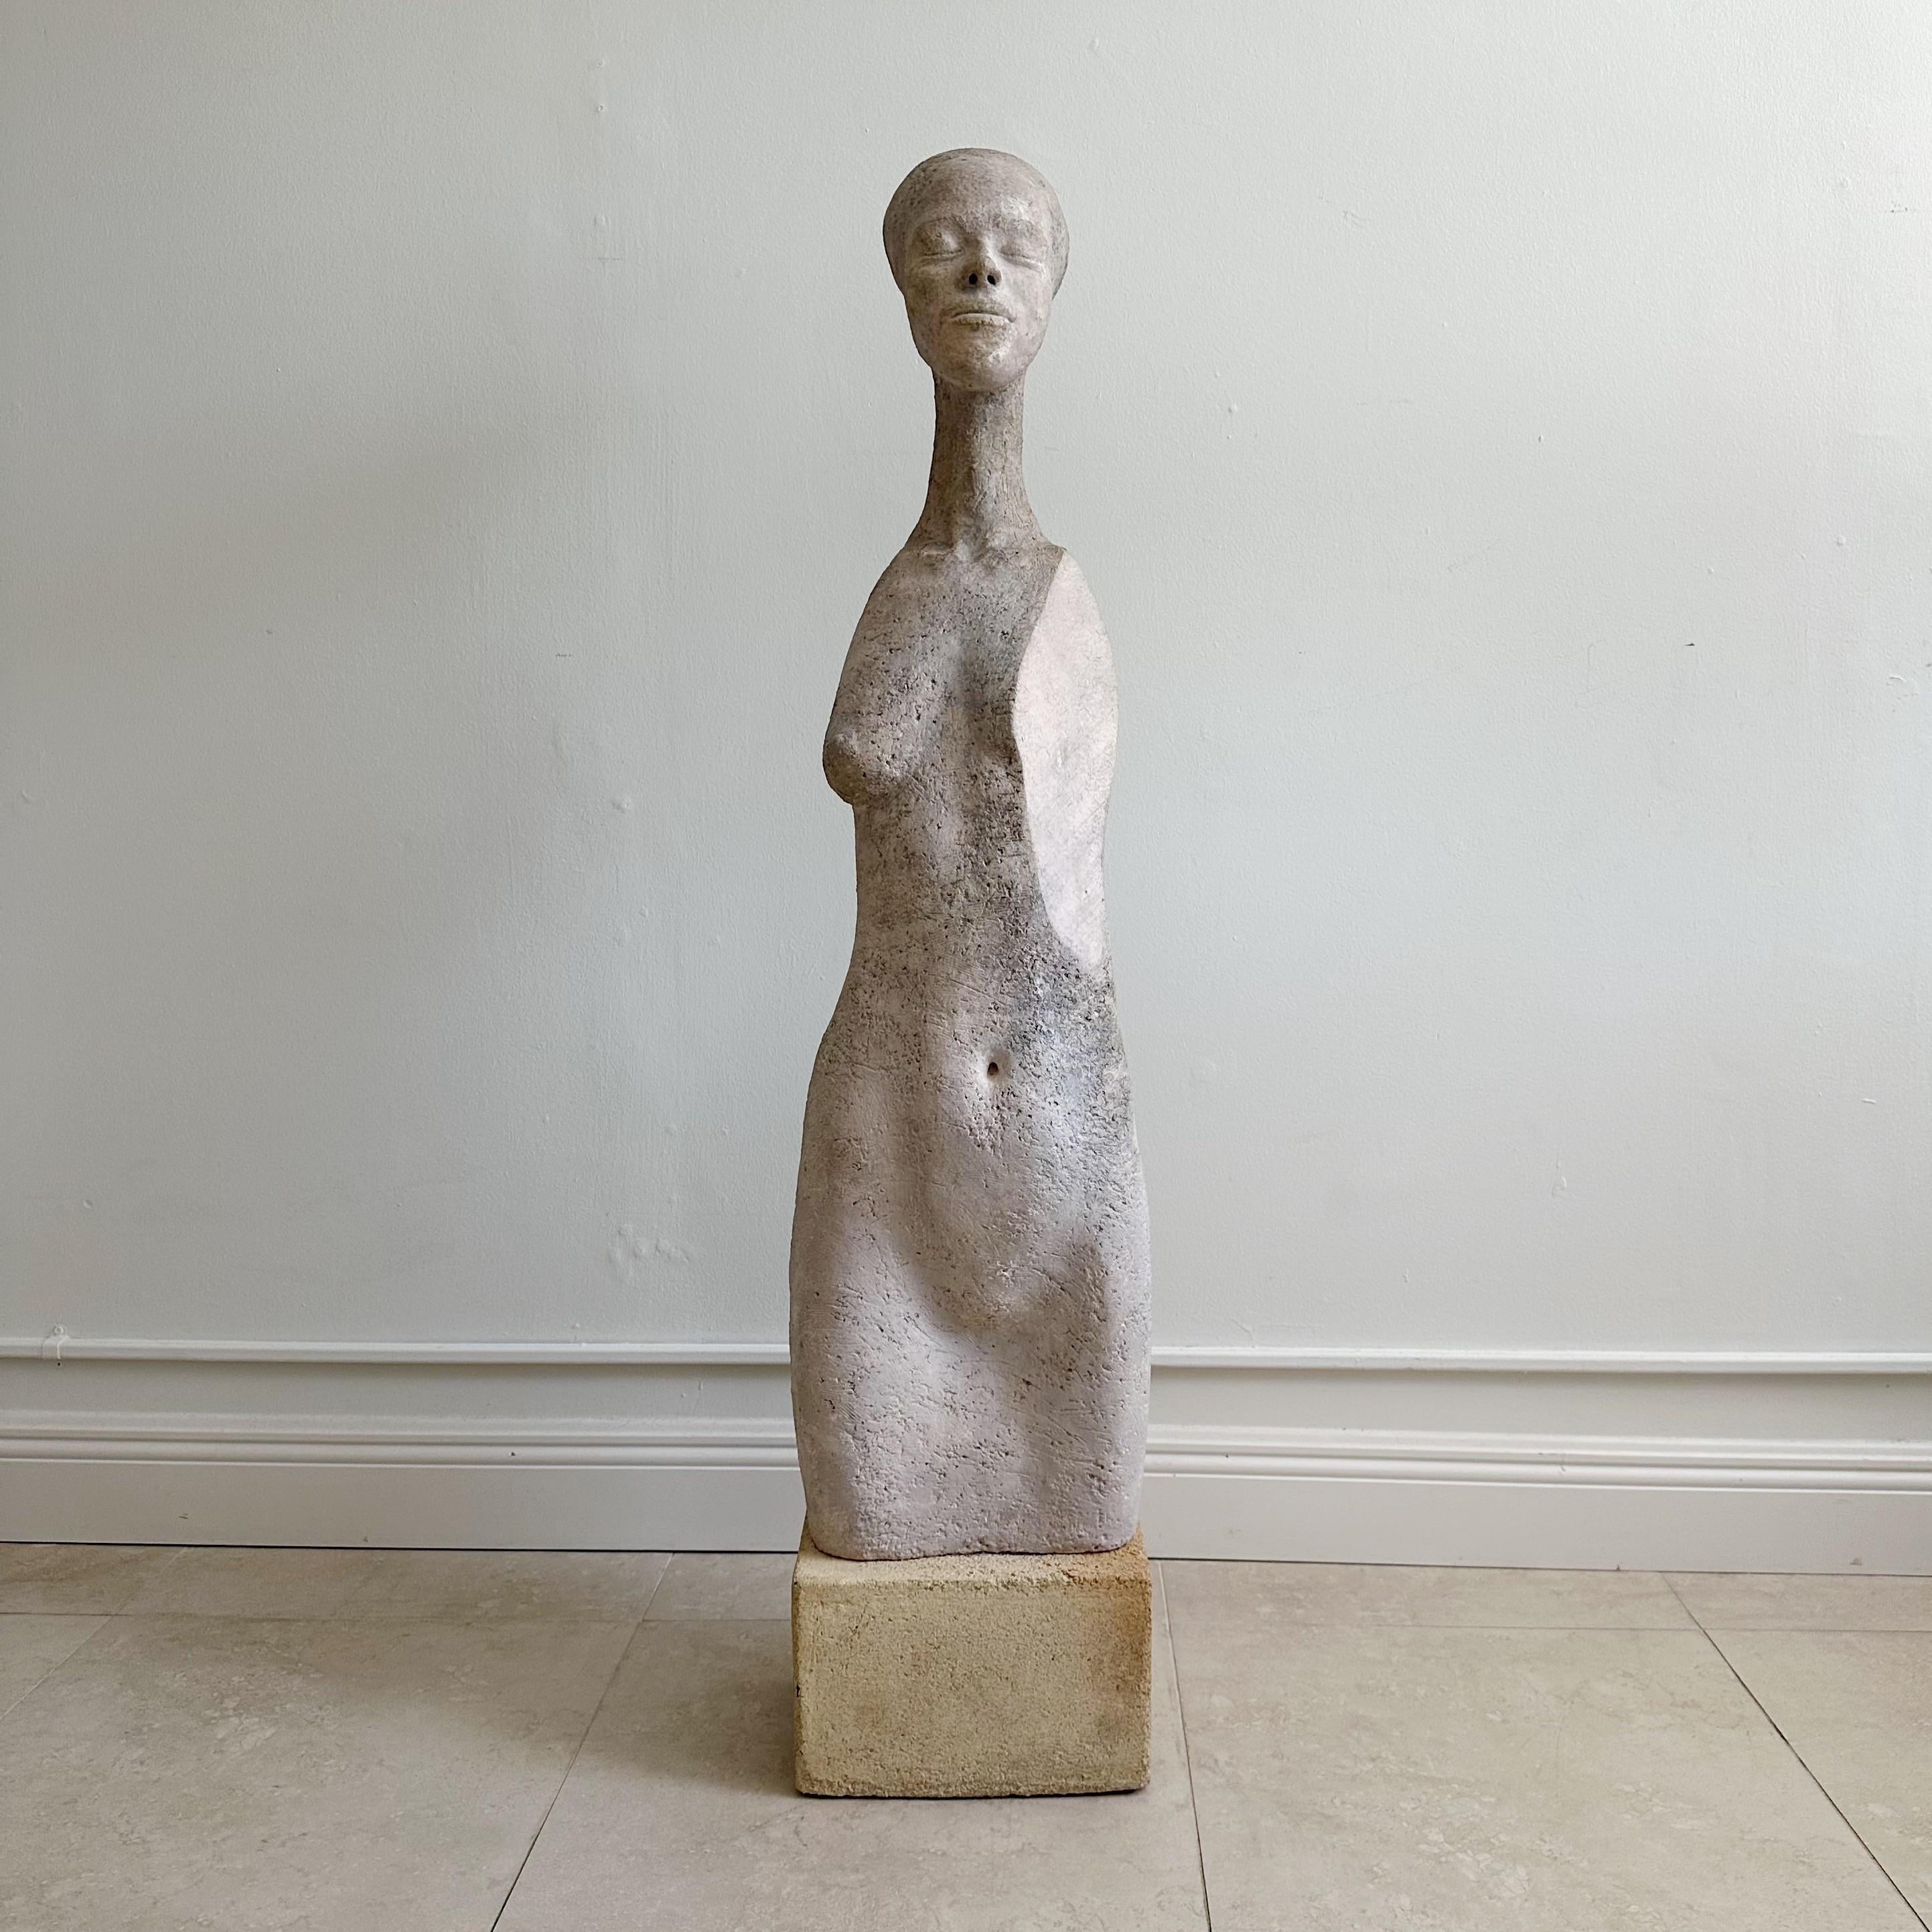 Tall Mid Century Nude Concrete Sculpture
A vintage concrete sculpture depicting a nude woman, showcasing evident signs of age and patina, which add to its weathered and antique appearance.